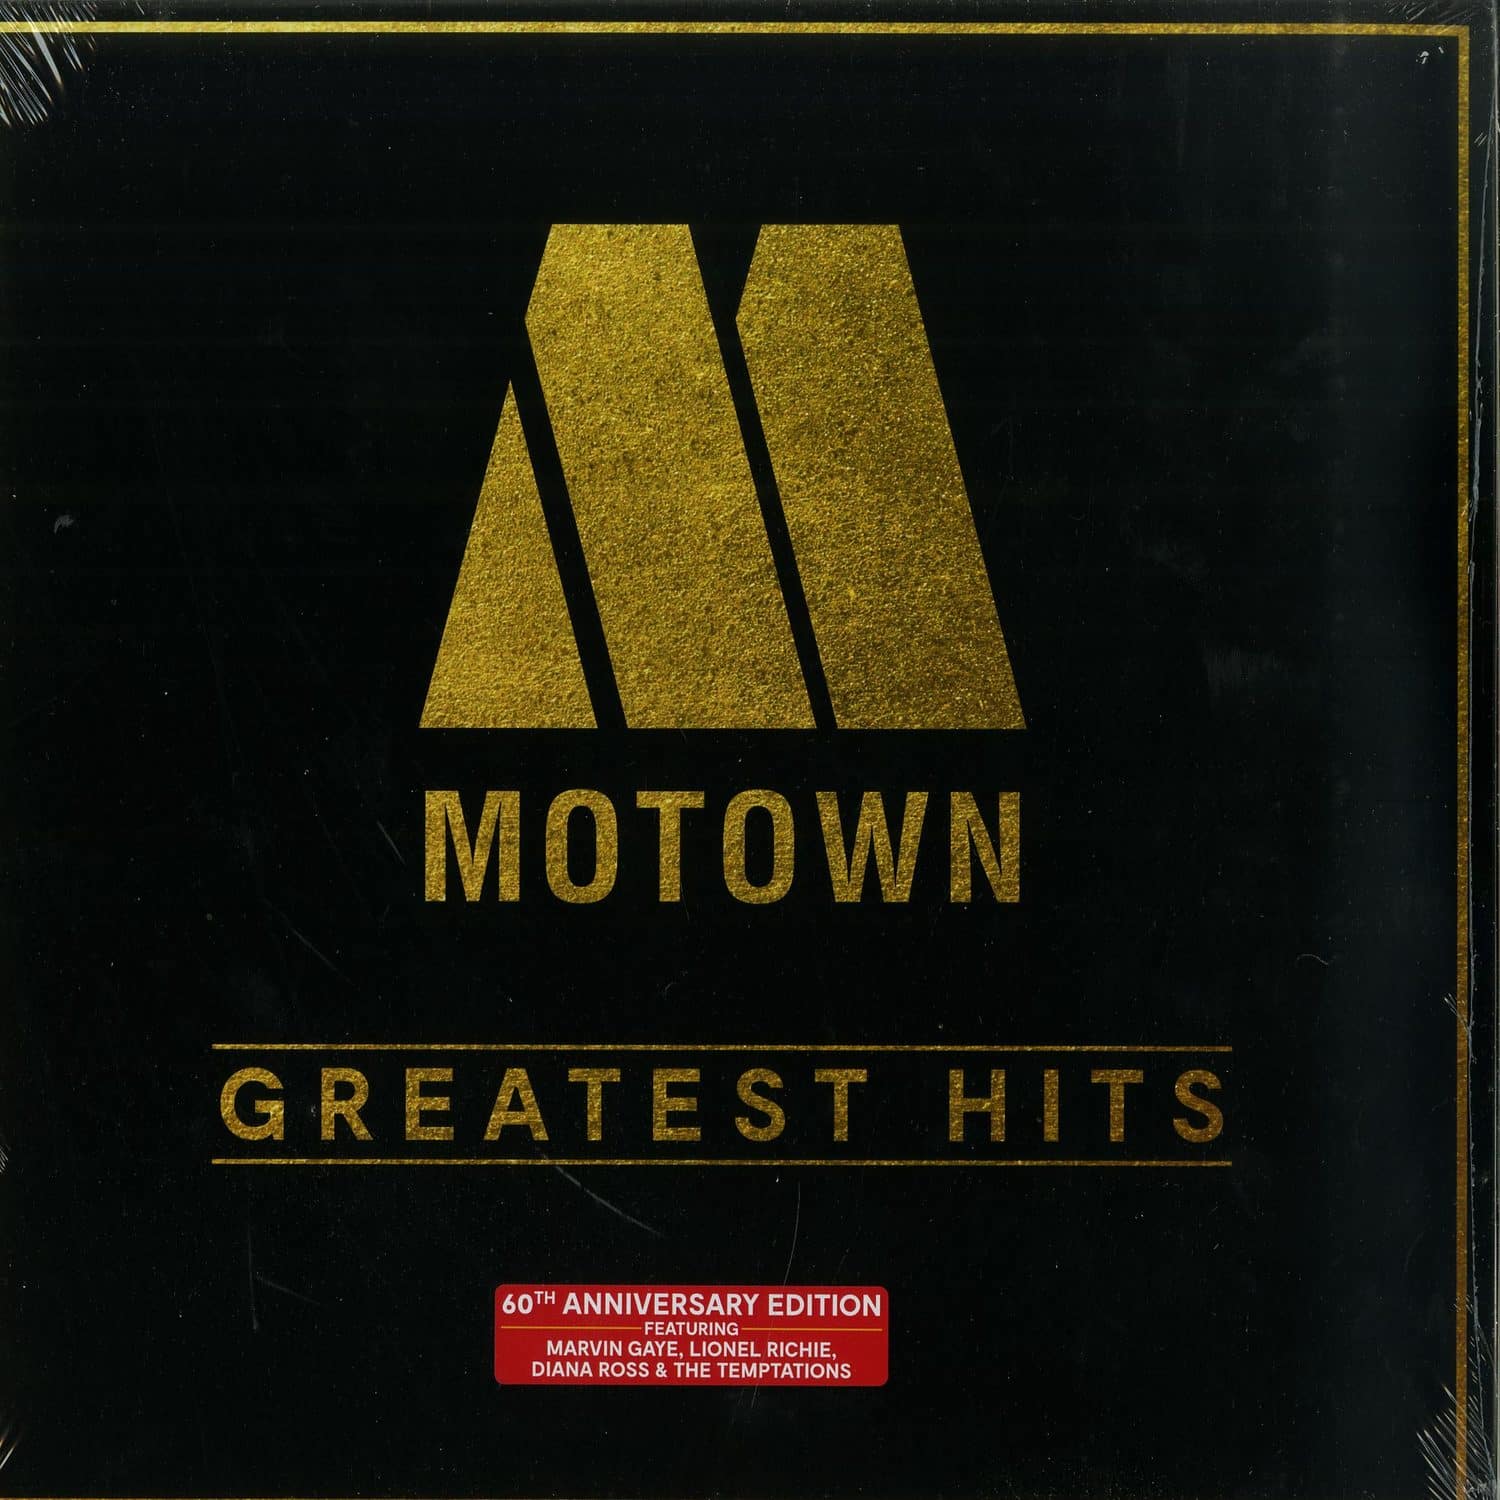 Varioust Artists - MOTOWN GREATEST HITS 